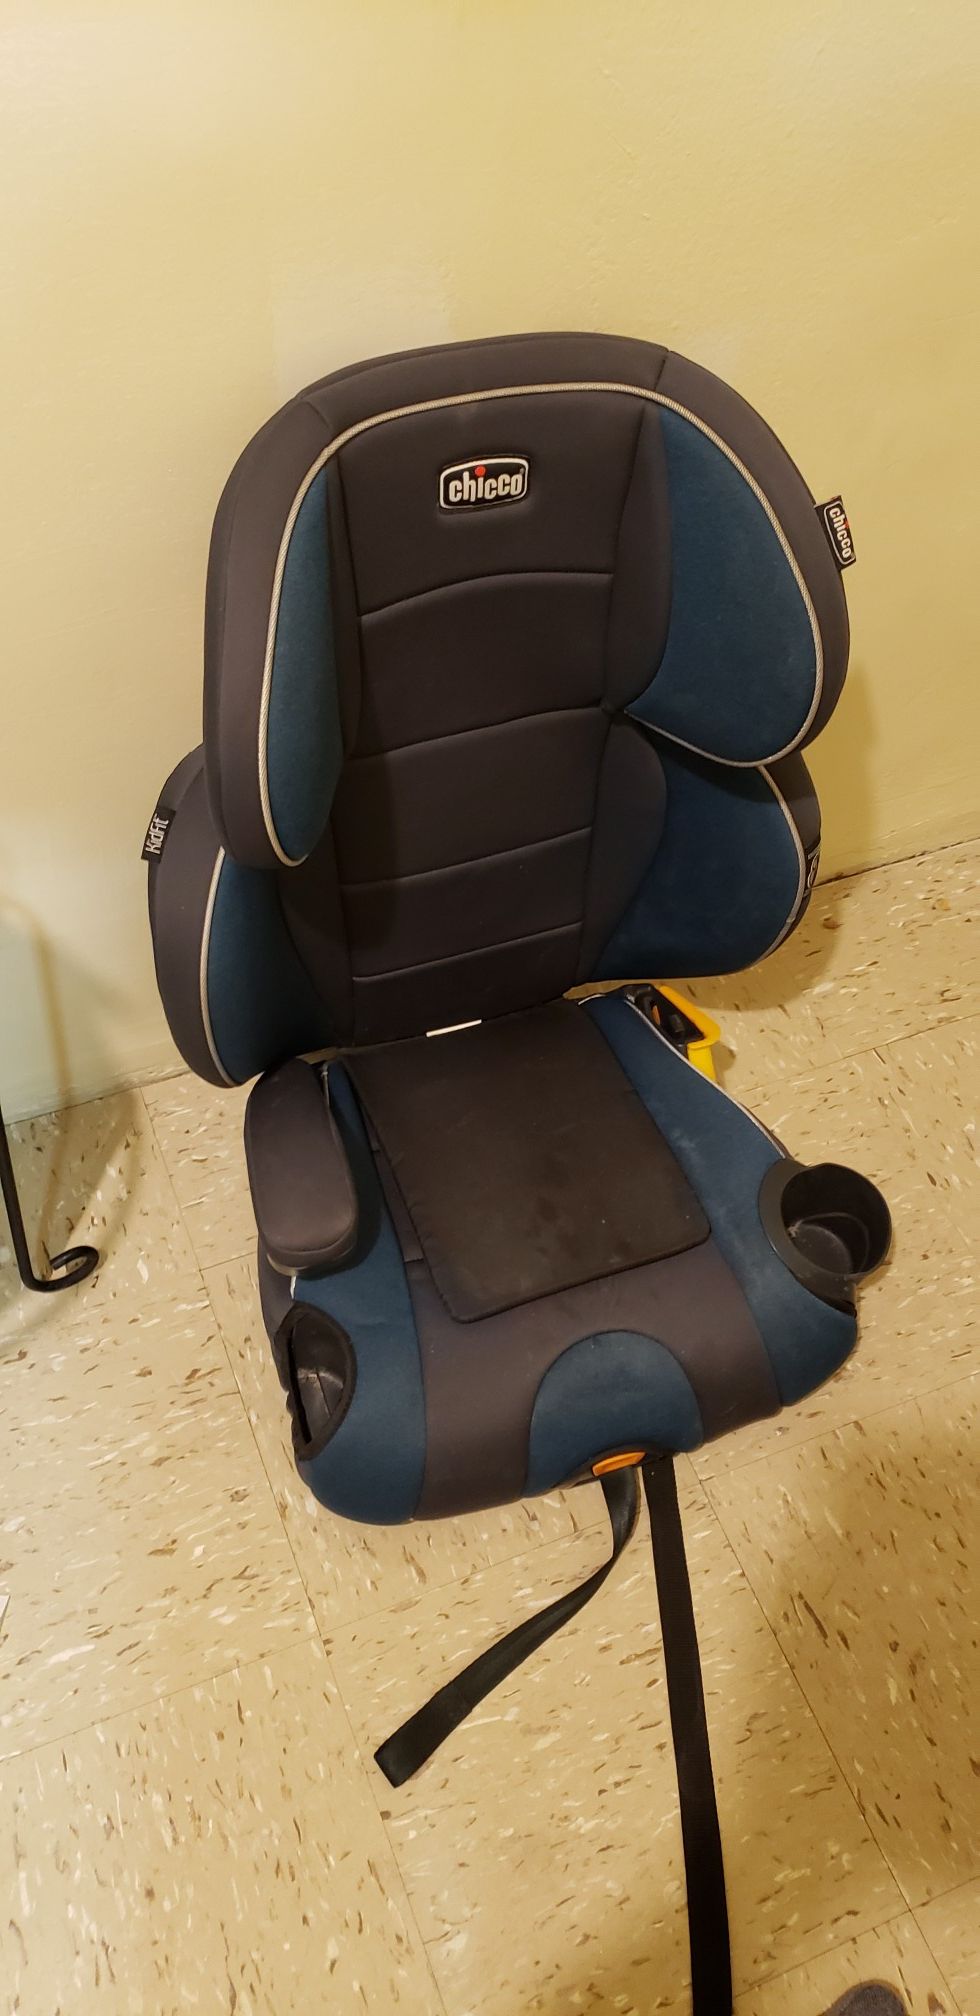 Chicco 2 in 1 car seat and booster seat